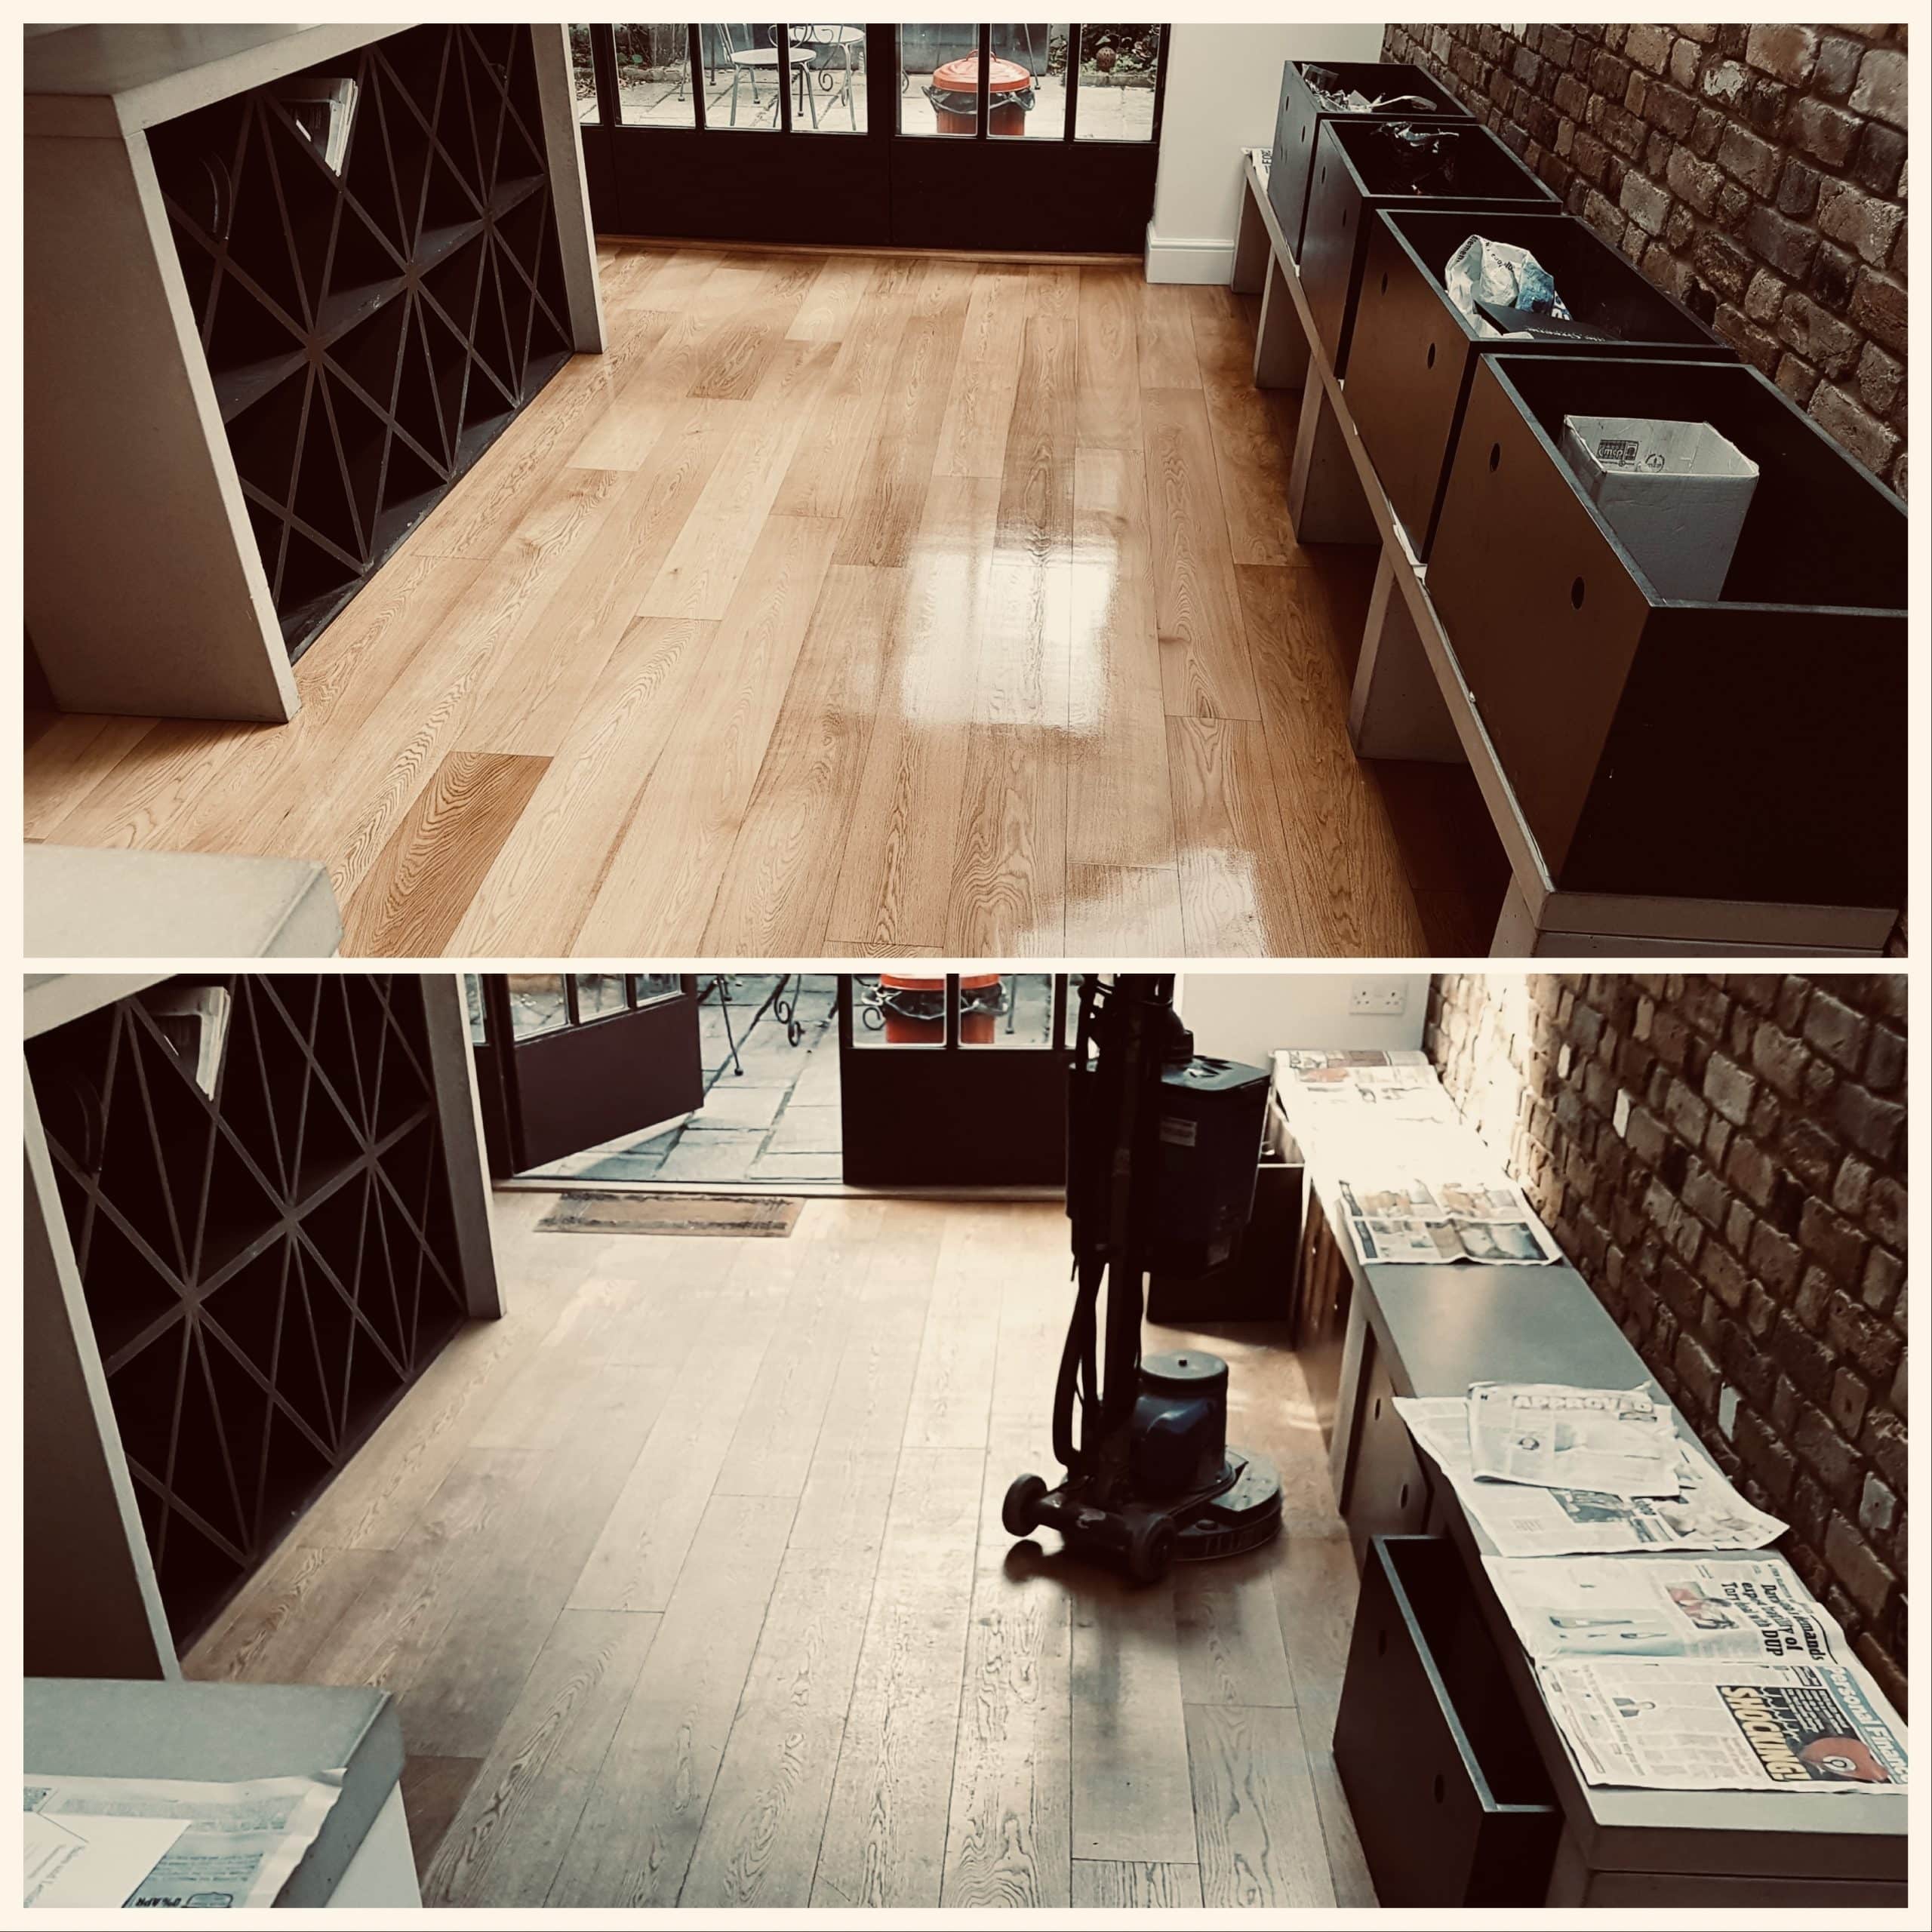 Before and After Floor Sanding Pictures